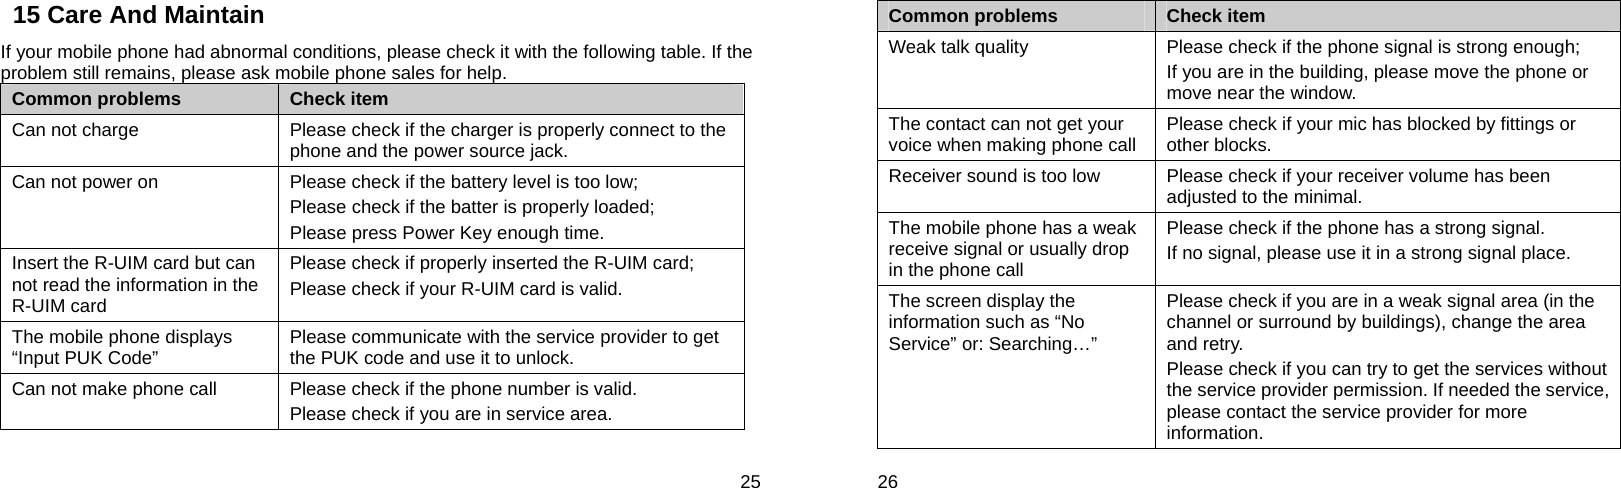  25 15 Care And Maintain If your mobile phone had abnormal conditions, please check it with the following table. If the problem still remains, please ask mobile phone sales for help. Common problems  Check item Can not charge  Please check if the charger is properly connect to the phone and the power source jack.   Can not power on  Please check if the battery level is too low; Please check if the batter is properly loaded;   Please press Power Key enough time. Insert the R-UIM card but can not read the information in the R-UIM card Please check if properly inserted the R-UIM card; Please check if your R-UIM card is valid.   The mobile phone displays “Input PUK Code”  Please communicate with the service provider to get the PUK code and use it to unlock. Can not make phone call  Please check if the phone number is valid.   Please check if you are in service area.    26 Common problems  Check item Weak talk quality  Please check if the phone signal is strong enough;   If you are in the building, please move the phone or move near the window.   The contact can not get your voice when making phone call  Please check if your mic has blocked by fittings or other blocks.   Receiver sound is too low  Please check if your receiver volume has been adjusted to the minimal.   The mobile phone has a weak receive signal or usually drop in the phone call Please check if the phone has a strong signal.   If no signal, please use it in a strong signal place. The screen display the information such as “No Service” or: Searching…”  Please check if you are in a weak signal area (in the channel or surround by buildings), change the area and retry. Please check if you can try to get the services without the service provider permission. If needed the service, please contact the service provider for more information. 